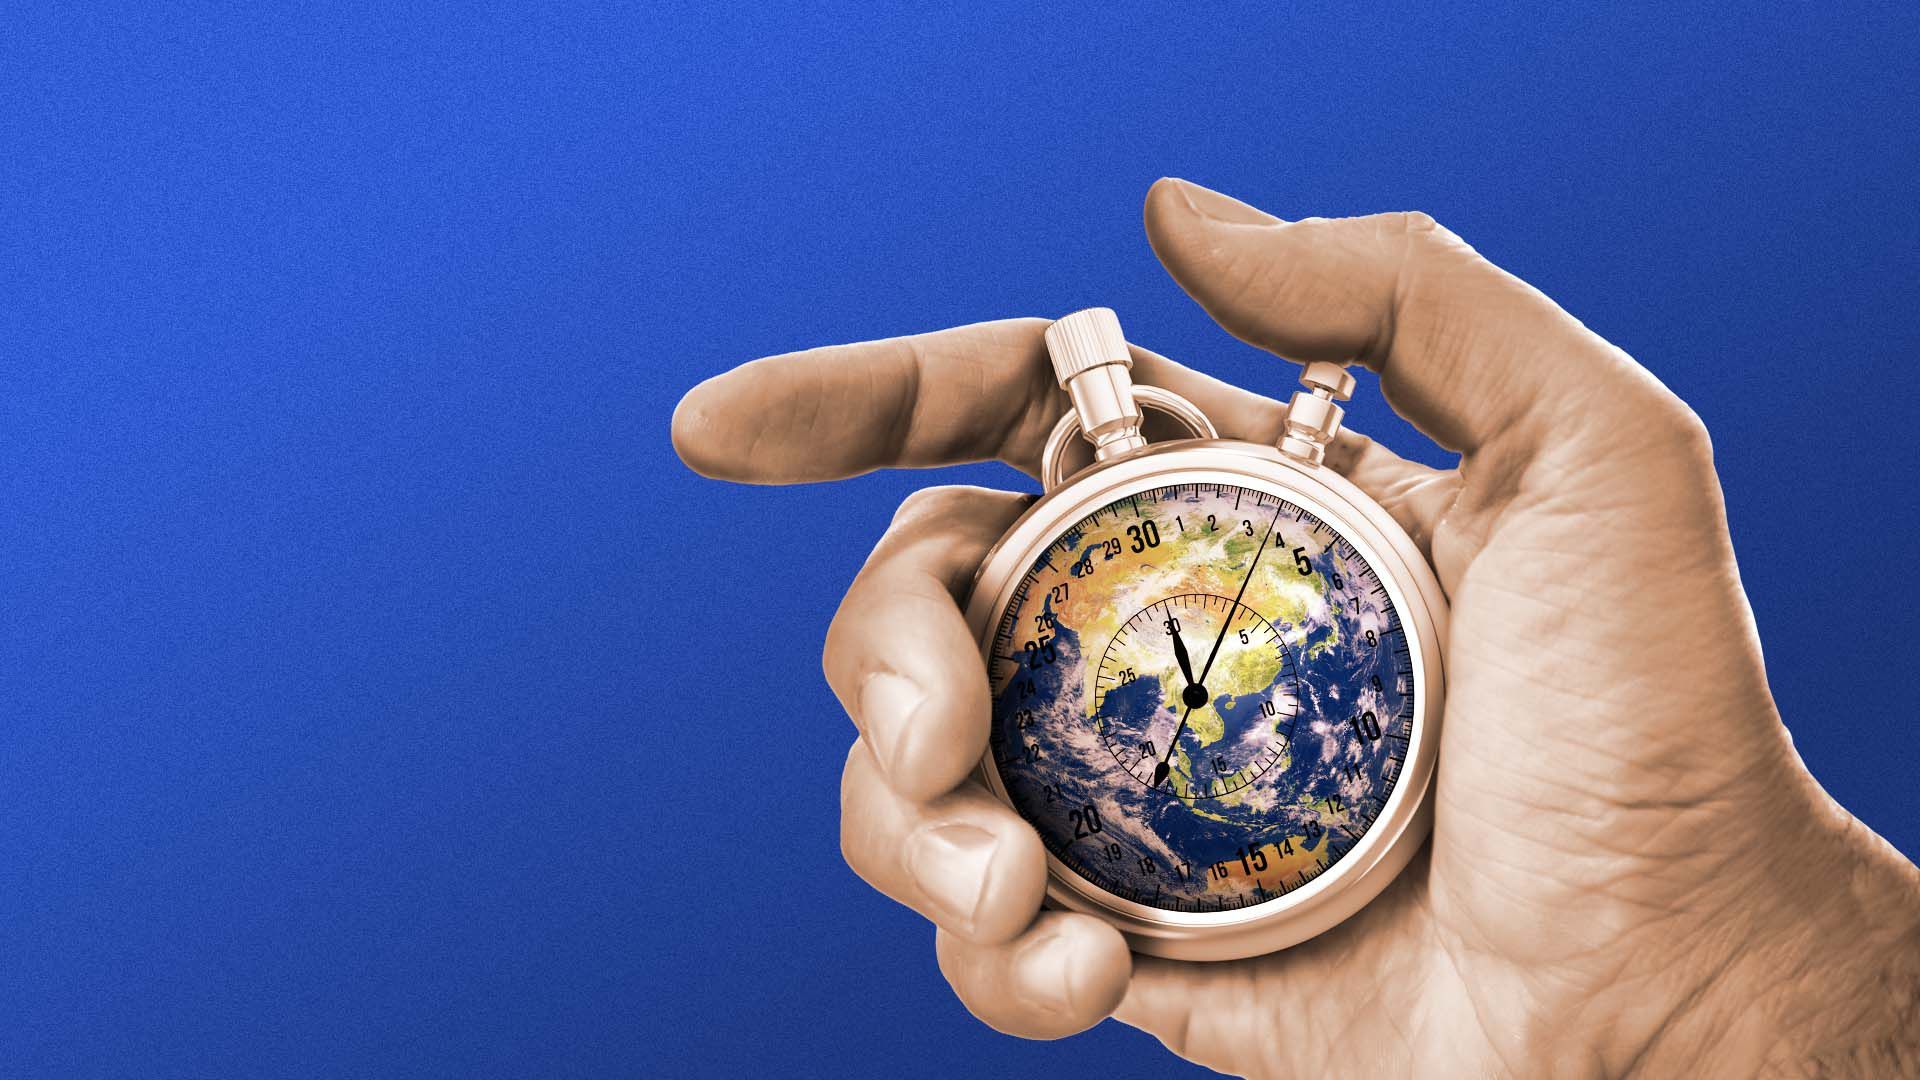 Illustration of hand holding a stopwatch with a globe on the face